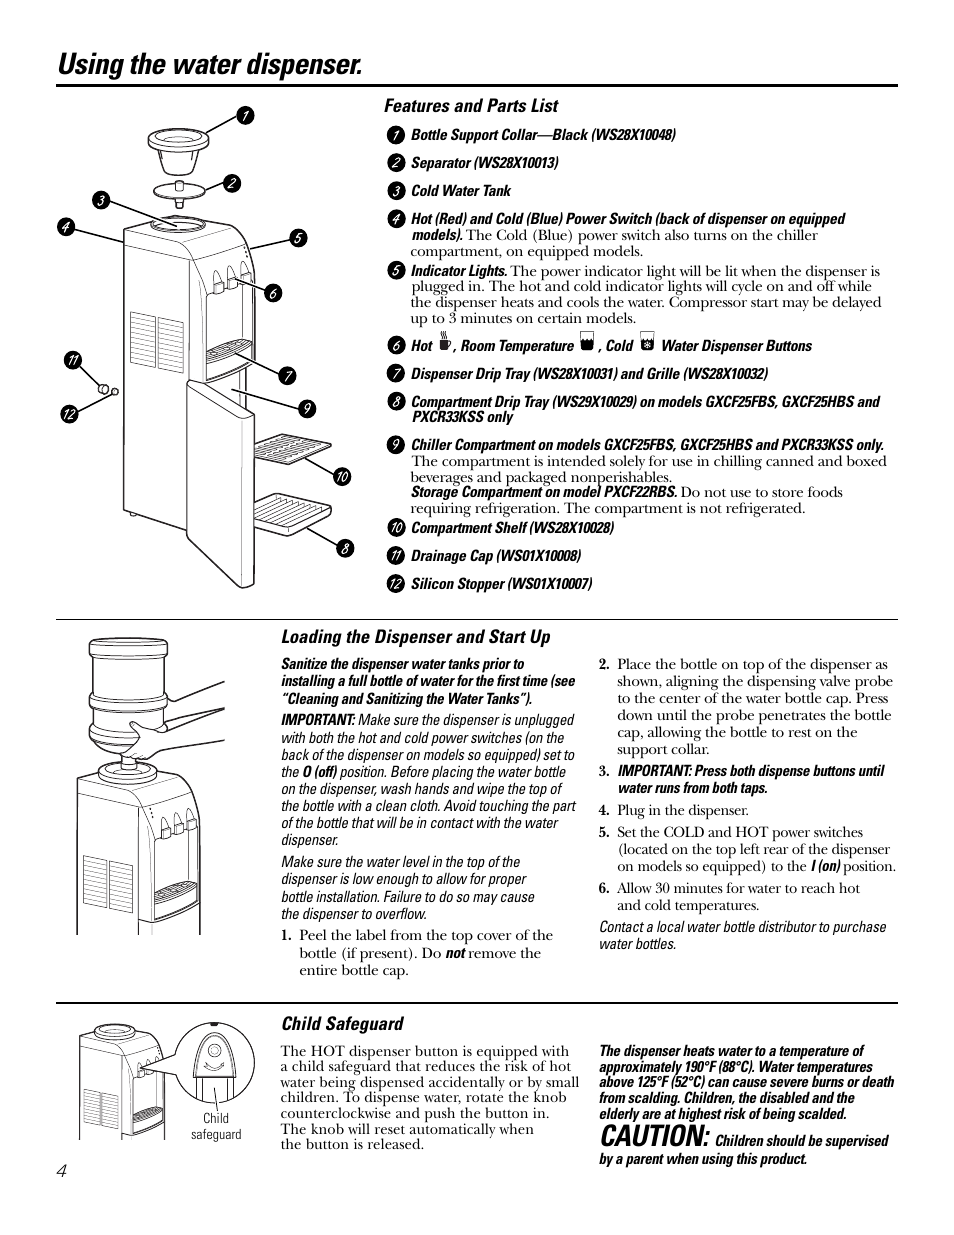 Child safeguard, Cold water and compartment features and parts list, Loading the dispenser | Using the water dispenser, Caution | GE GXCF25FBS User Manual | Page 4 / 28